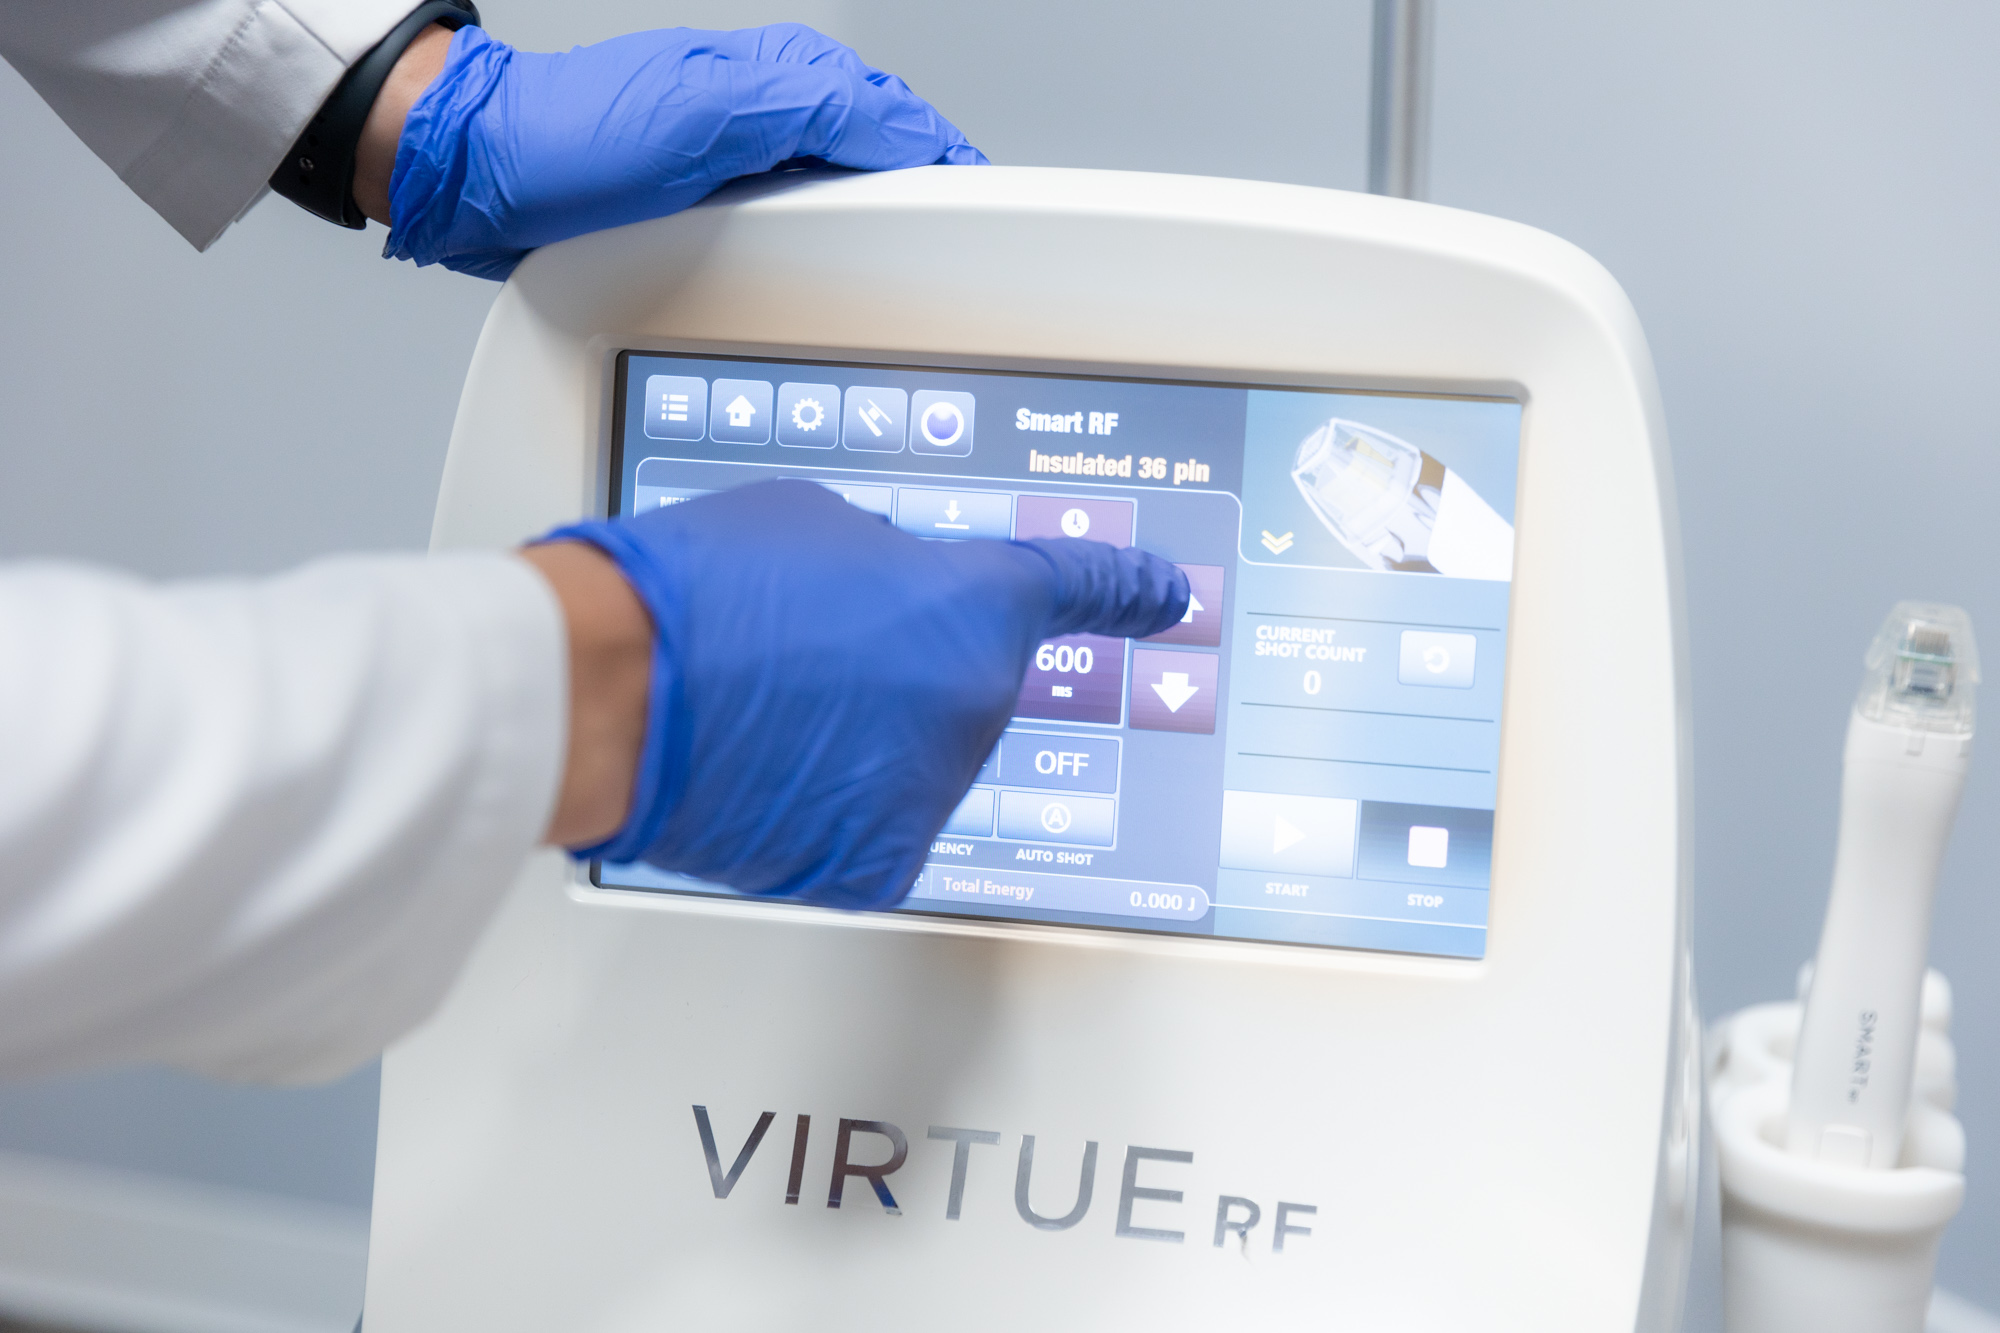 A Radiant Divine provider adjusts the settings on the Virtue RF microneedling platform. Virtue RF skin tightening can be used for a non-surgical mommy makeover